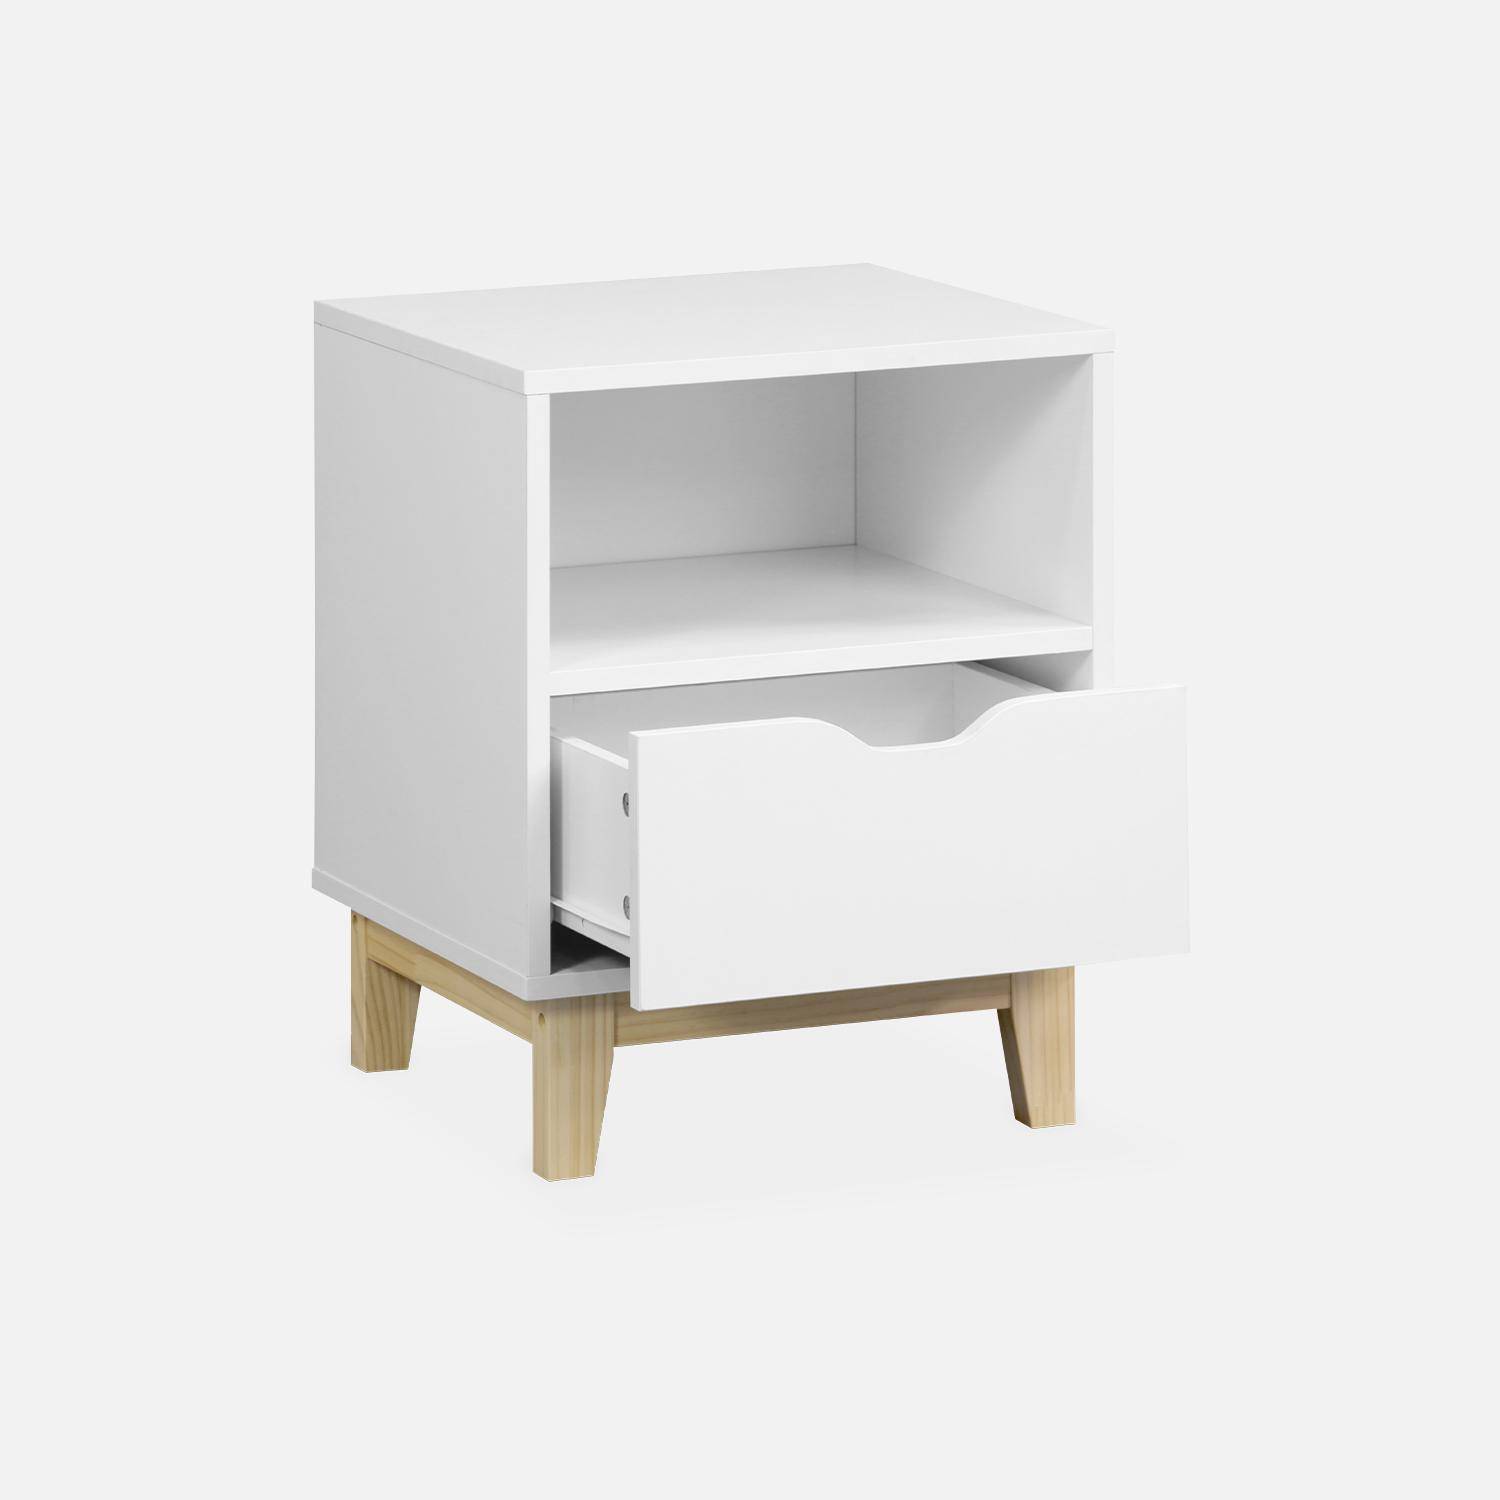 White bedside table with fir wood legs - Floki - 40 x 39 x 52cm - 1 drawer and 1 niche Photo3